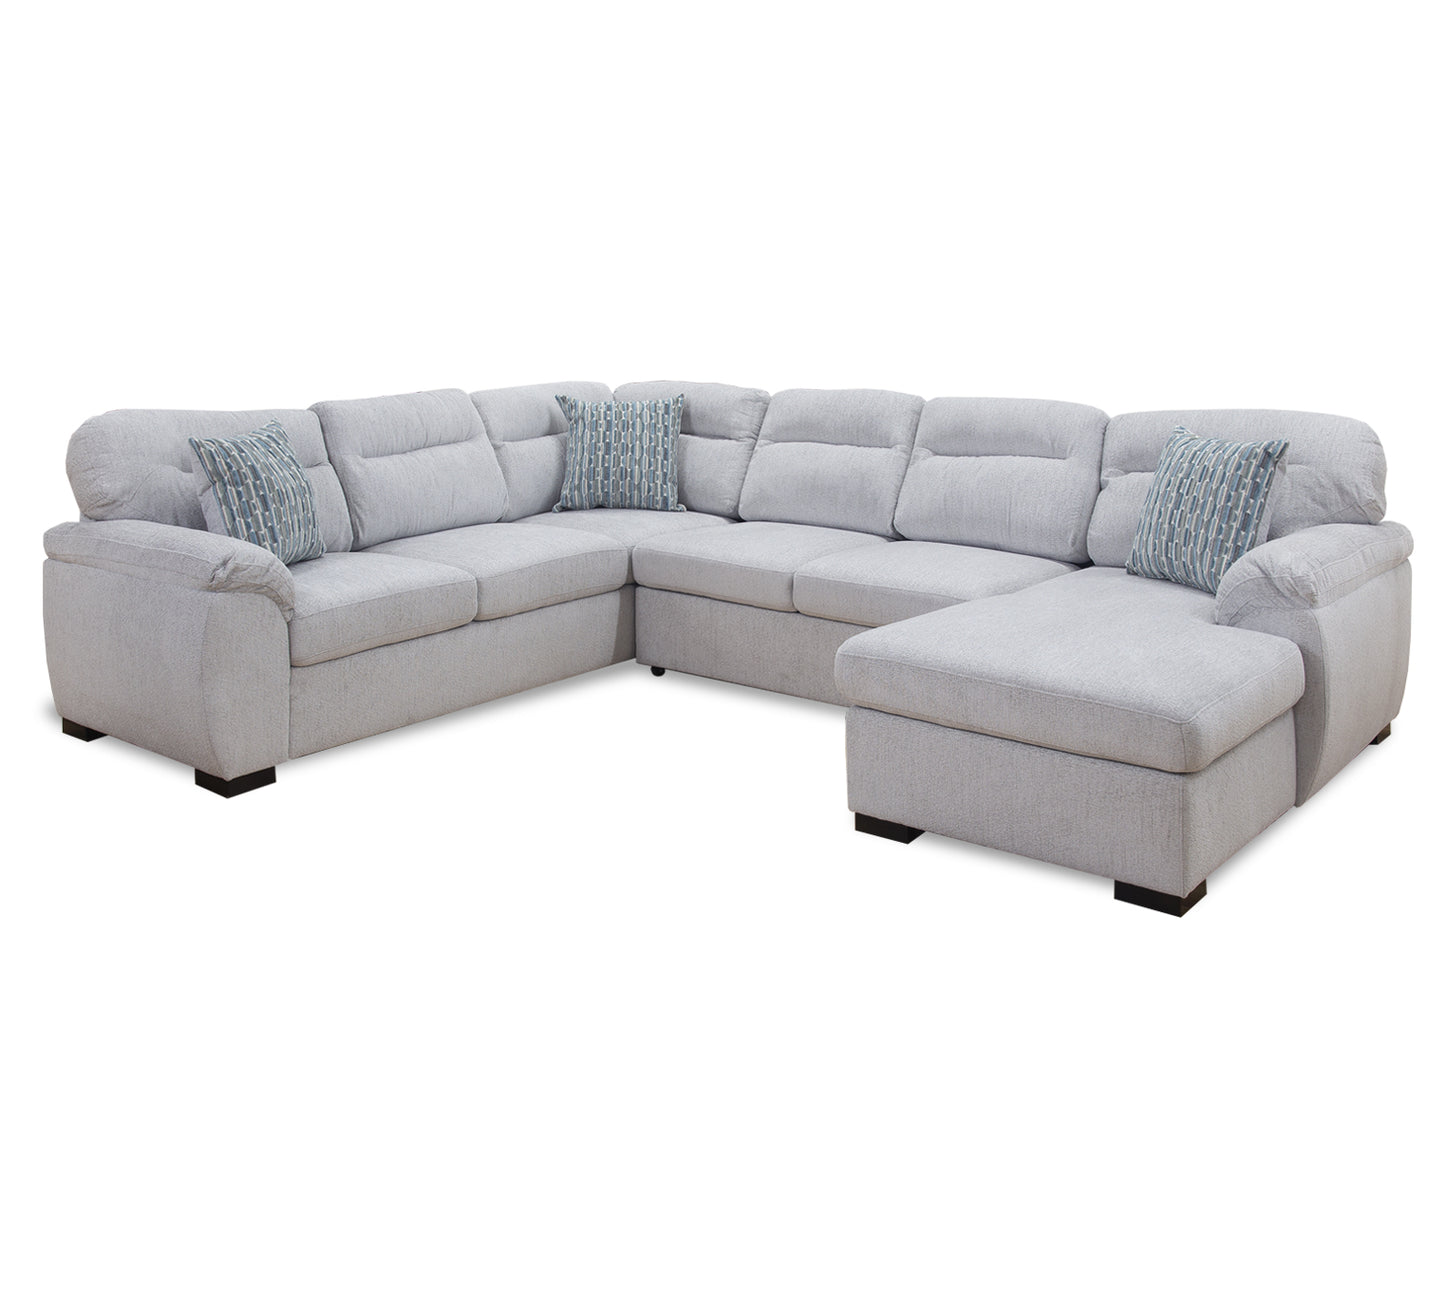 Kelly 3 Piece Pop-Up Sectional